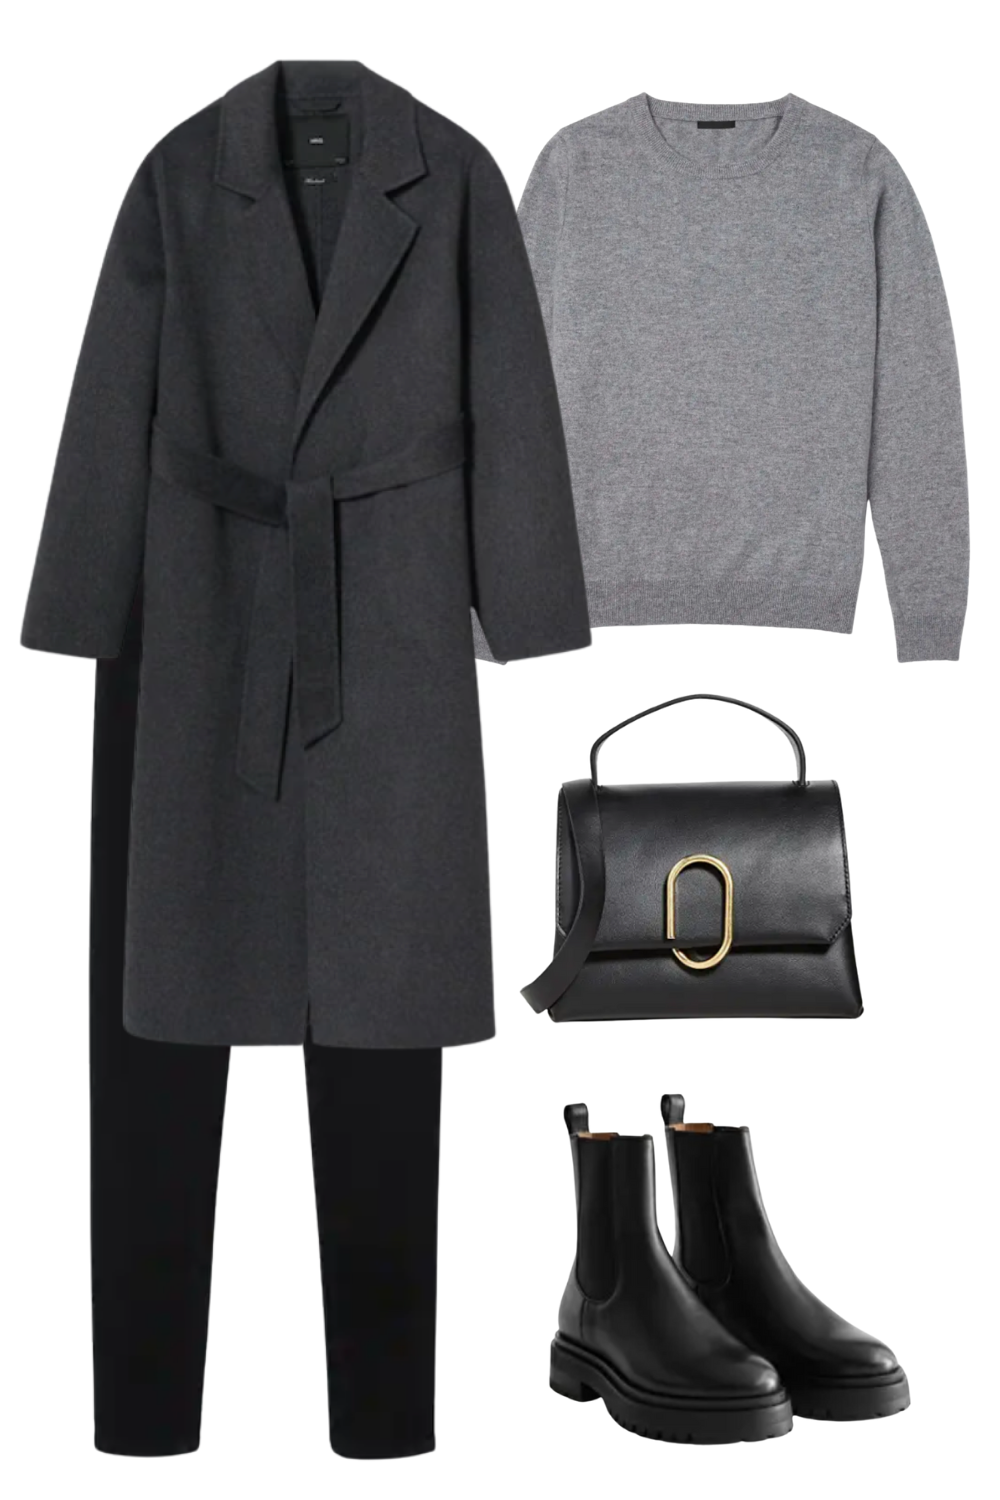 8 Winter Work Outfits That Nail Cold-Weather Dressing For Monday To Friday